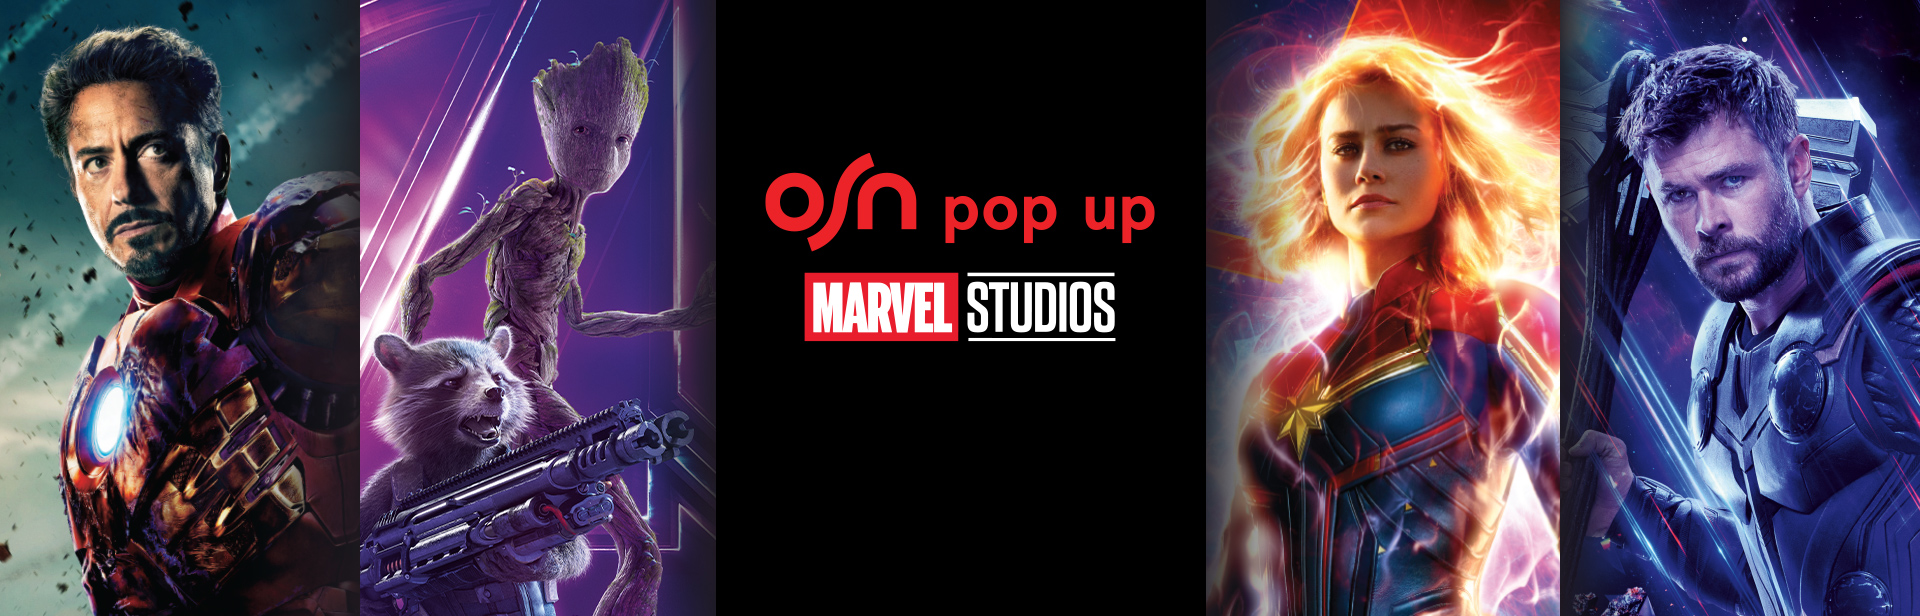 Marvel-ous Movies on OSN Pop Up